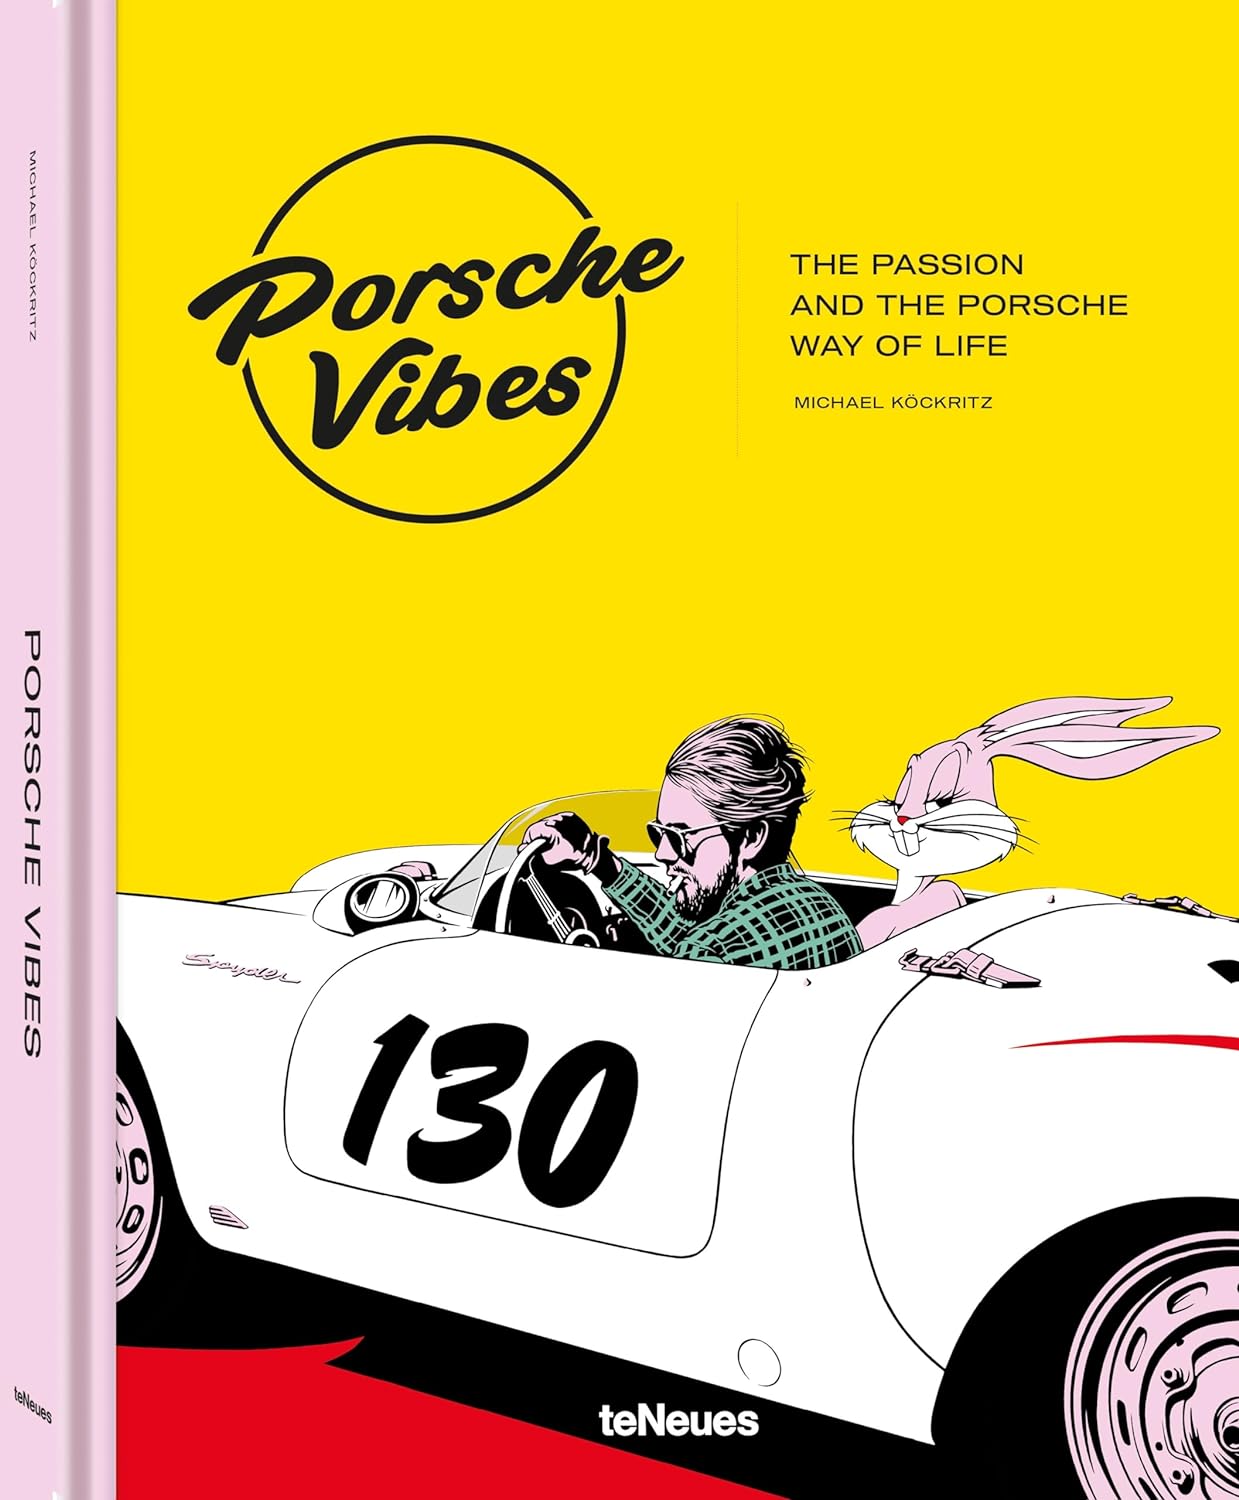 Porsche Vibes - The Passion and the Porsche Way of Life